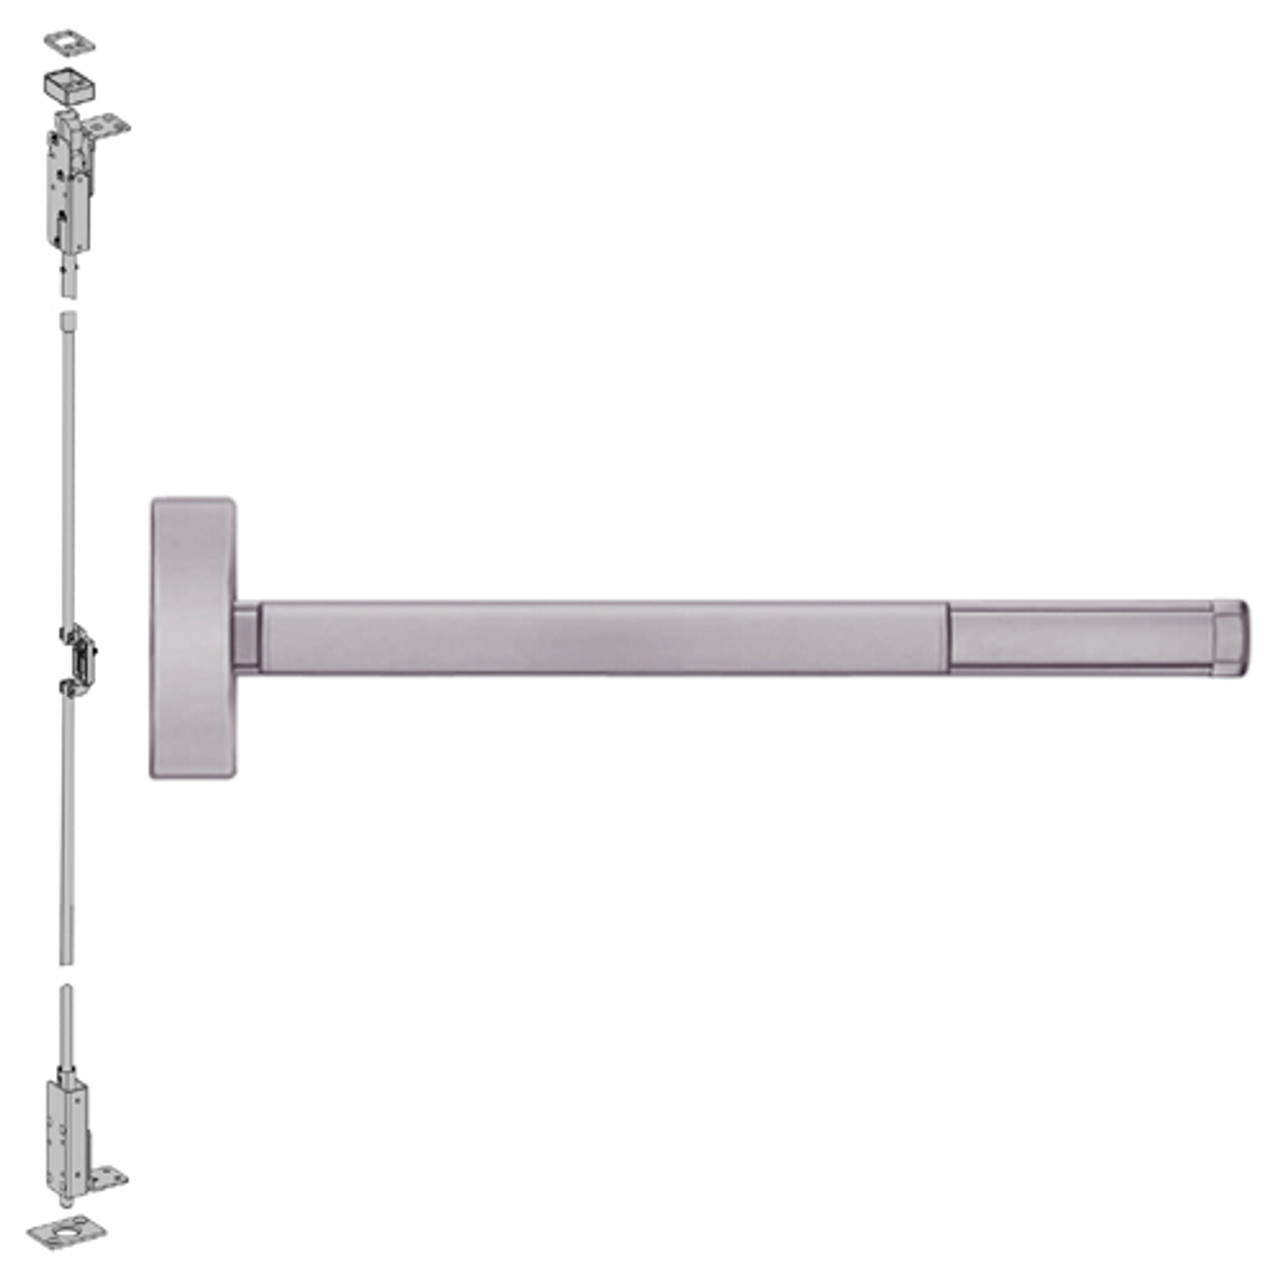 2715CD-630-48 PHI 2700 Series Wood Door Concealed Vertical Rod Device Prepped for Thumbpiece Always Active with Cylinder Dogging in Satin Stainless Steel Finish